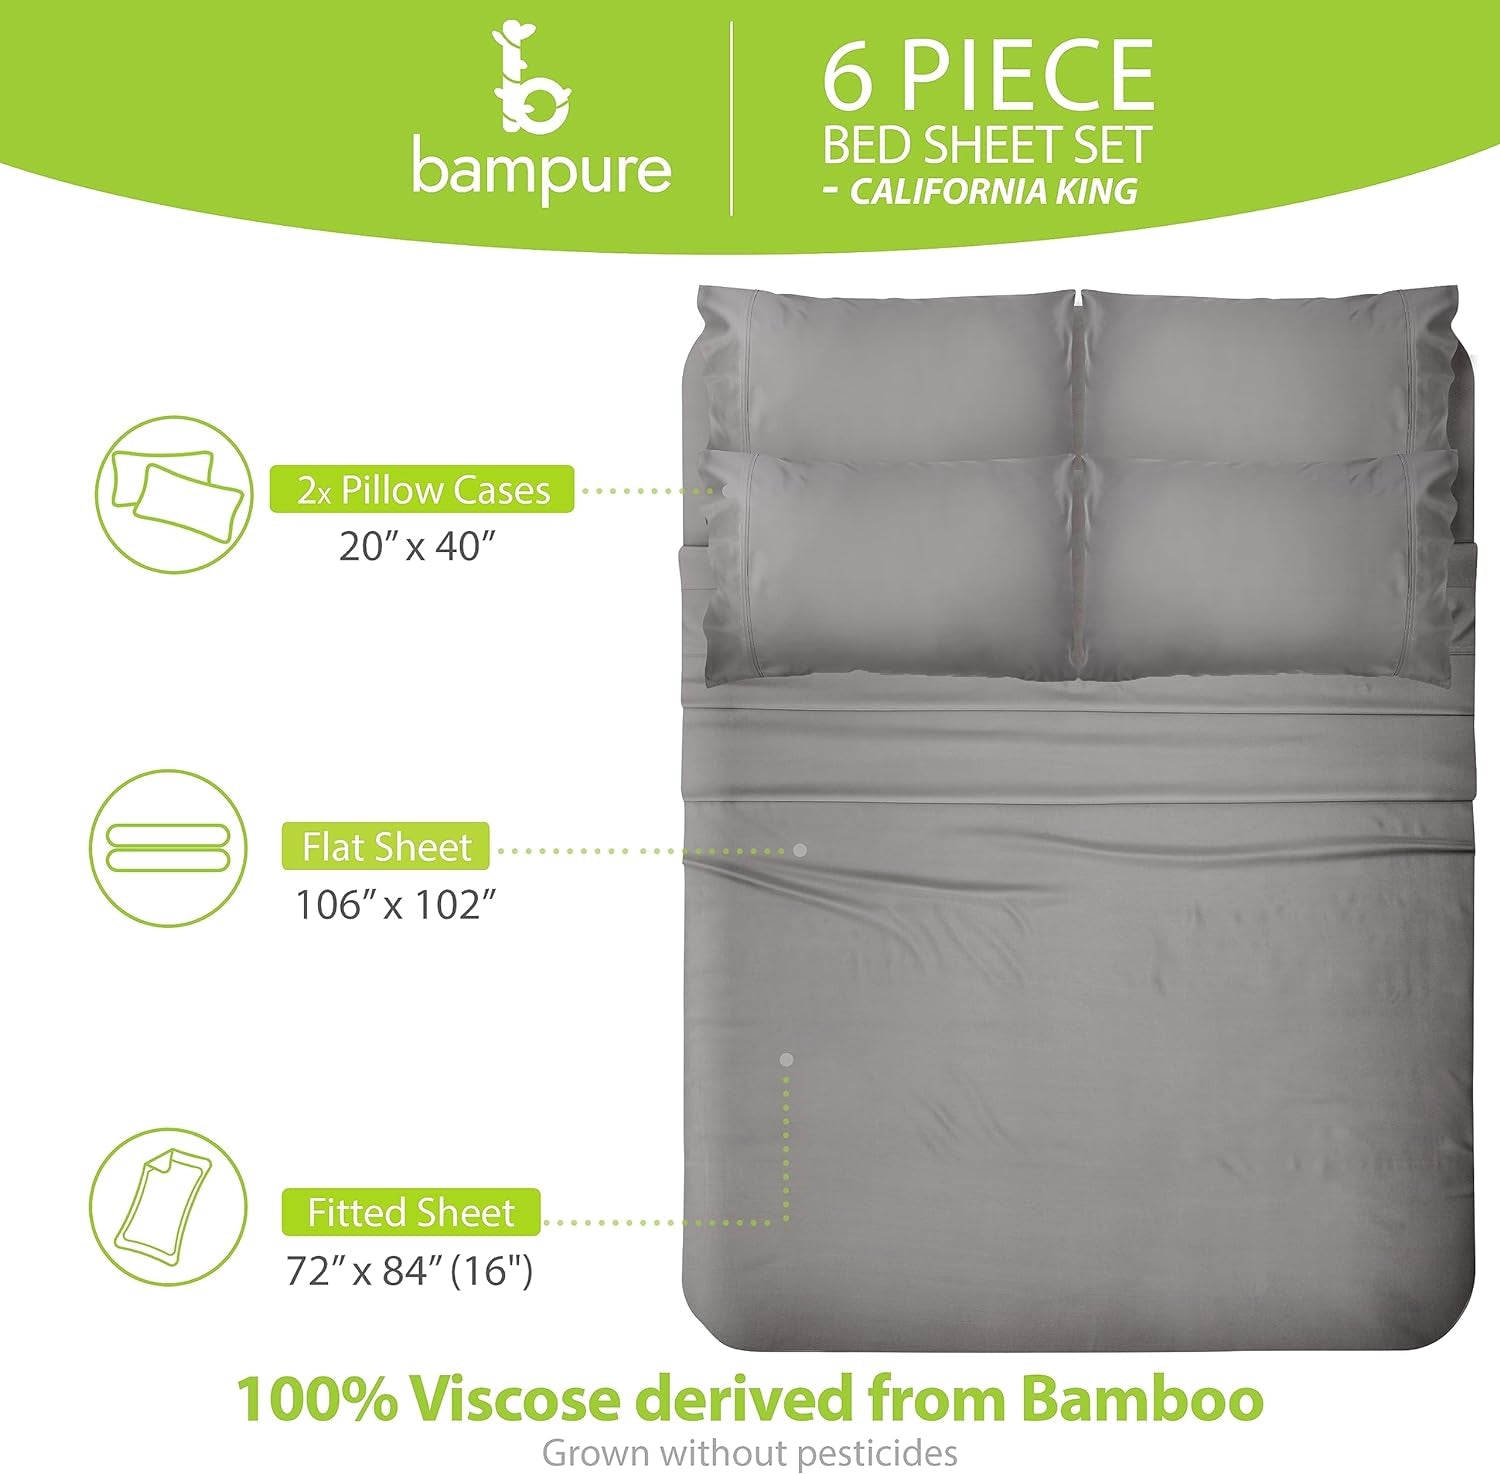 100% Viscose from Bamboo Sheets California King - 6PC Set - Super Soft Cooling Sheets - up to 16’’ Deep Pocket - Luxury Series -1 Flat Sheet,1 Fitted Sheet,4 Pillowcases (Stonegrey)